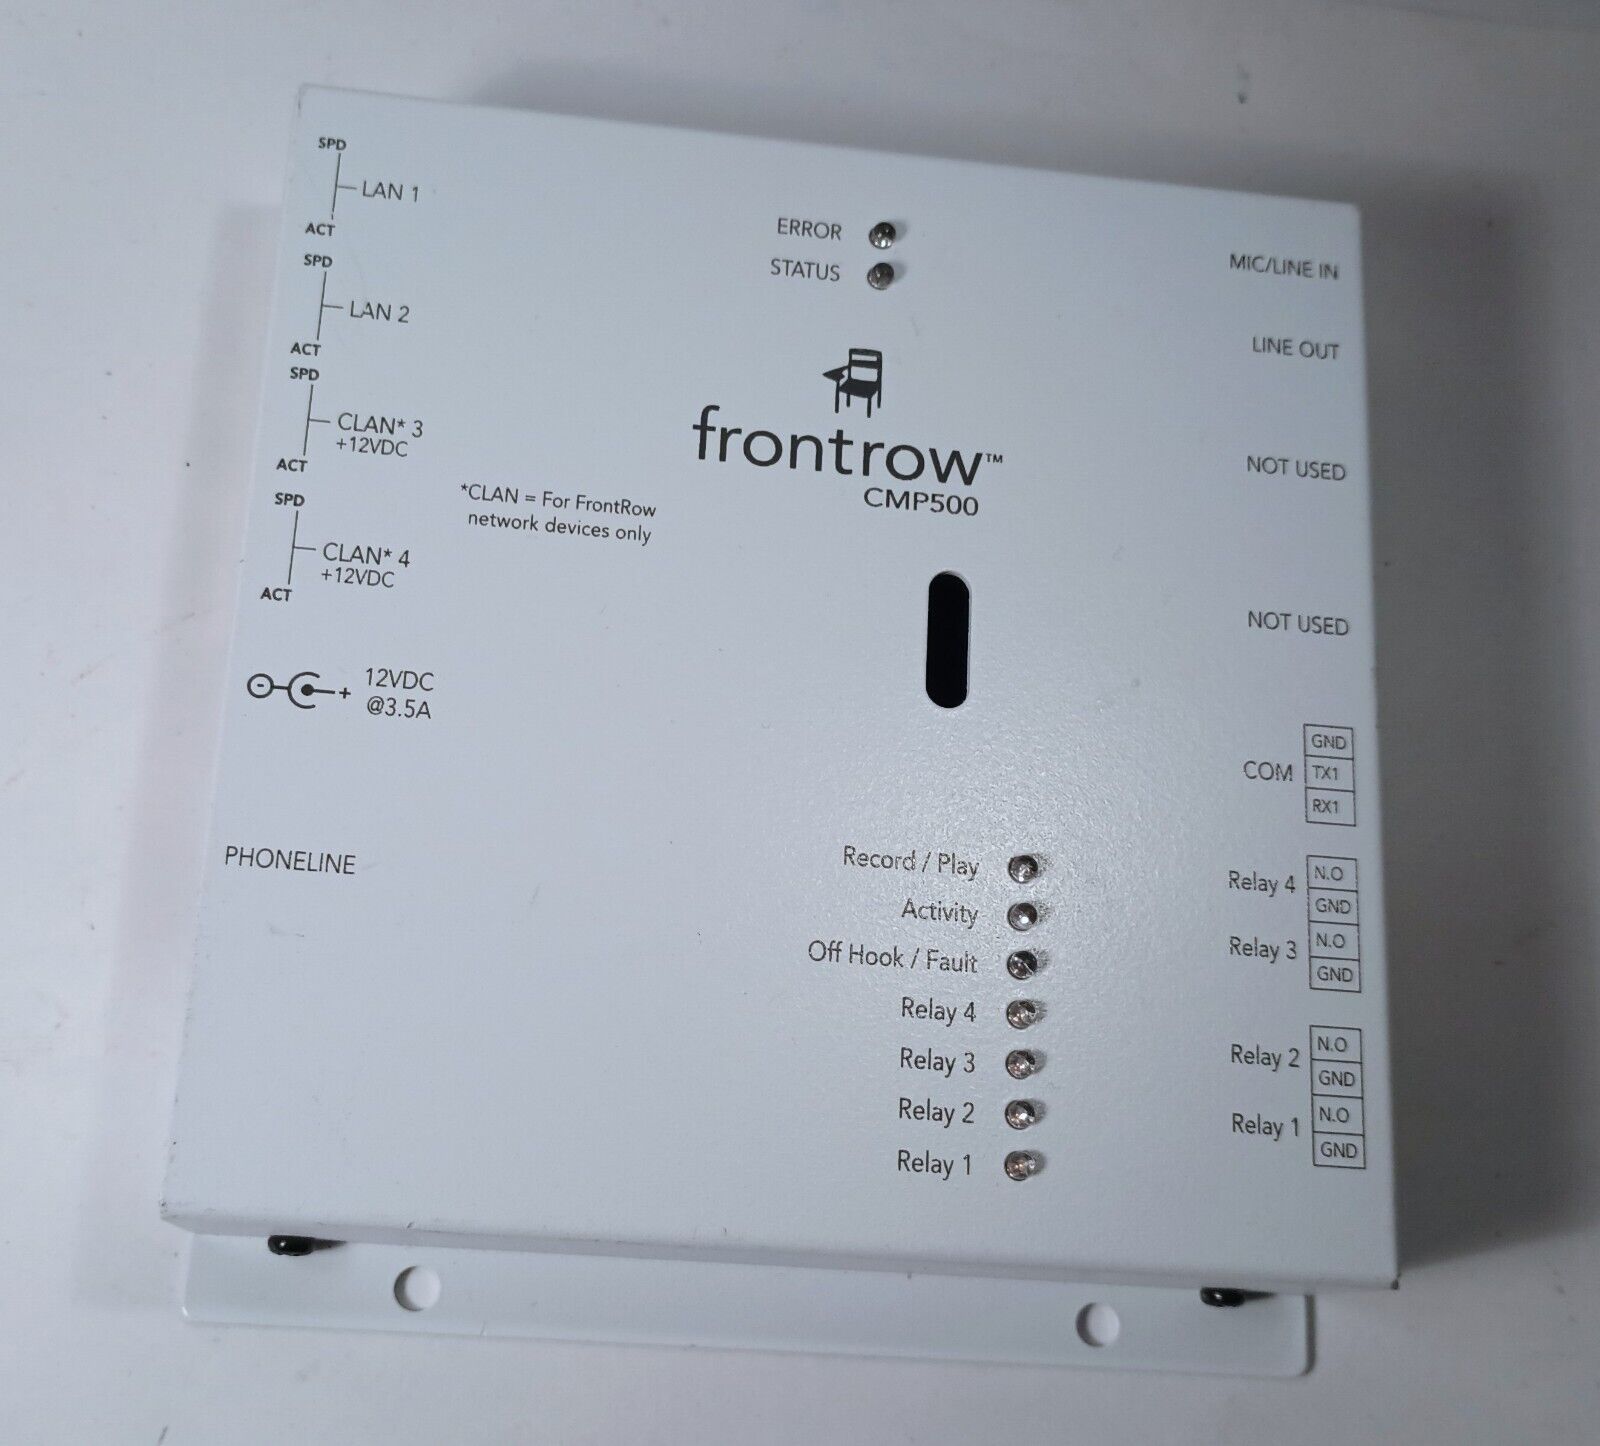 Frontrow CMP500 Universal Telephone Interface - VoIP Phone Adapter